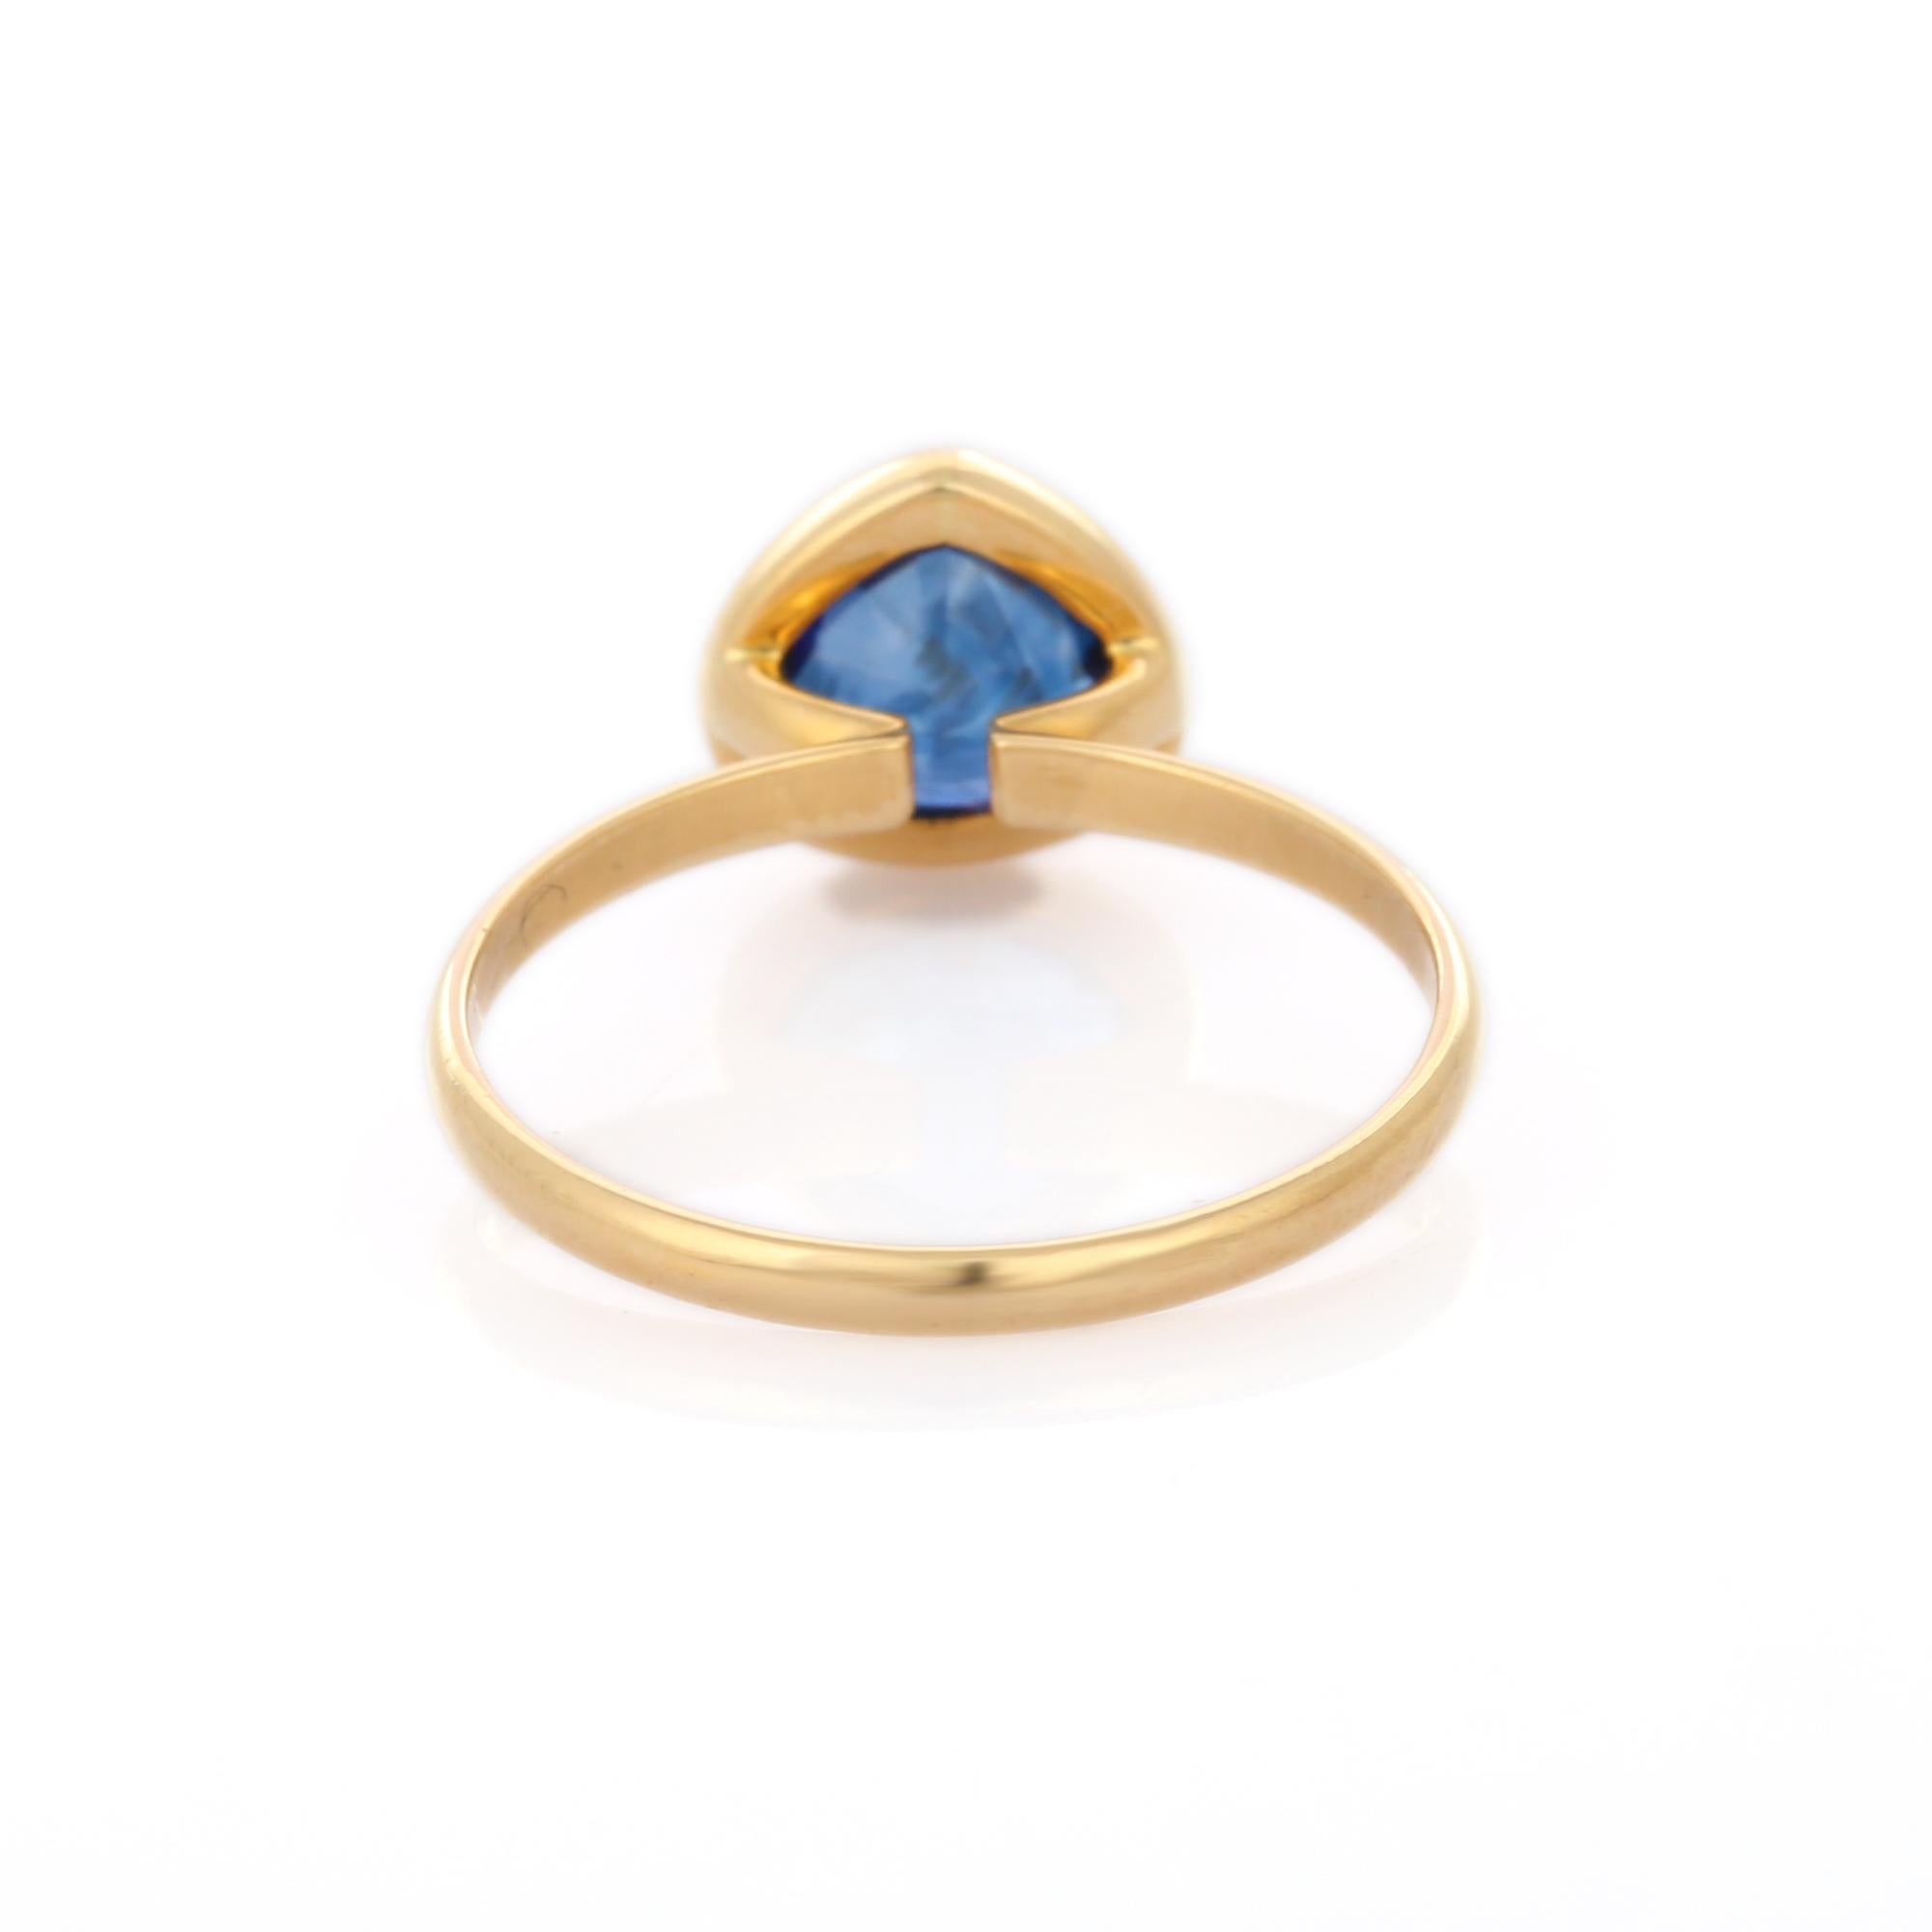 For Sale:  1.66 ct Bezel Set Pear Cut Blue Sapphire Gemstone 18K Yellow Gold Solitaire Ring 4